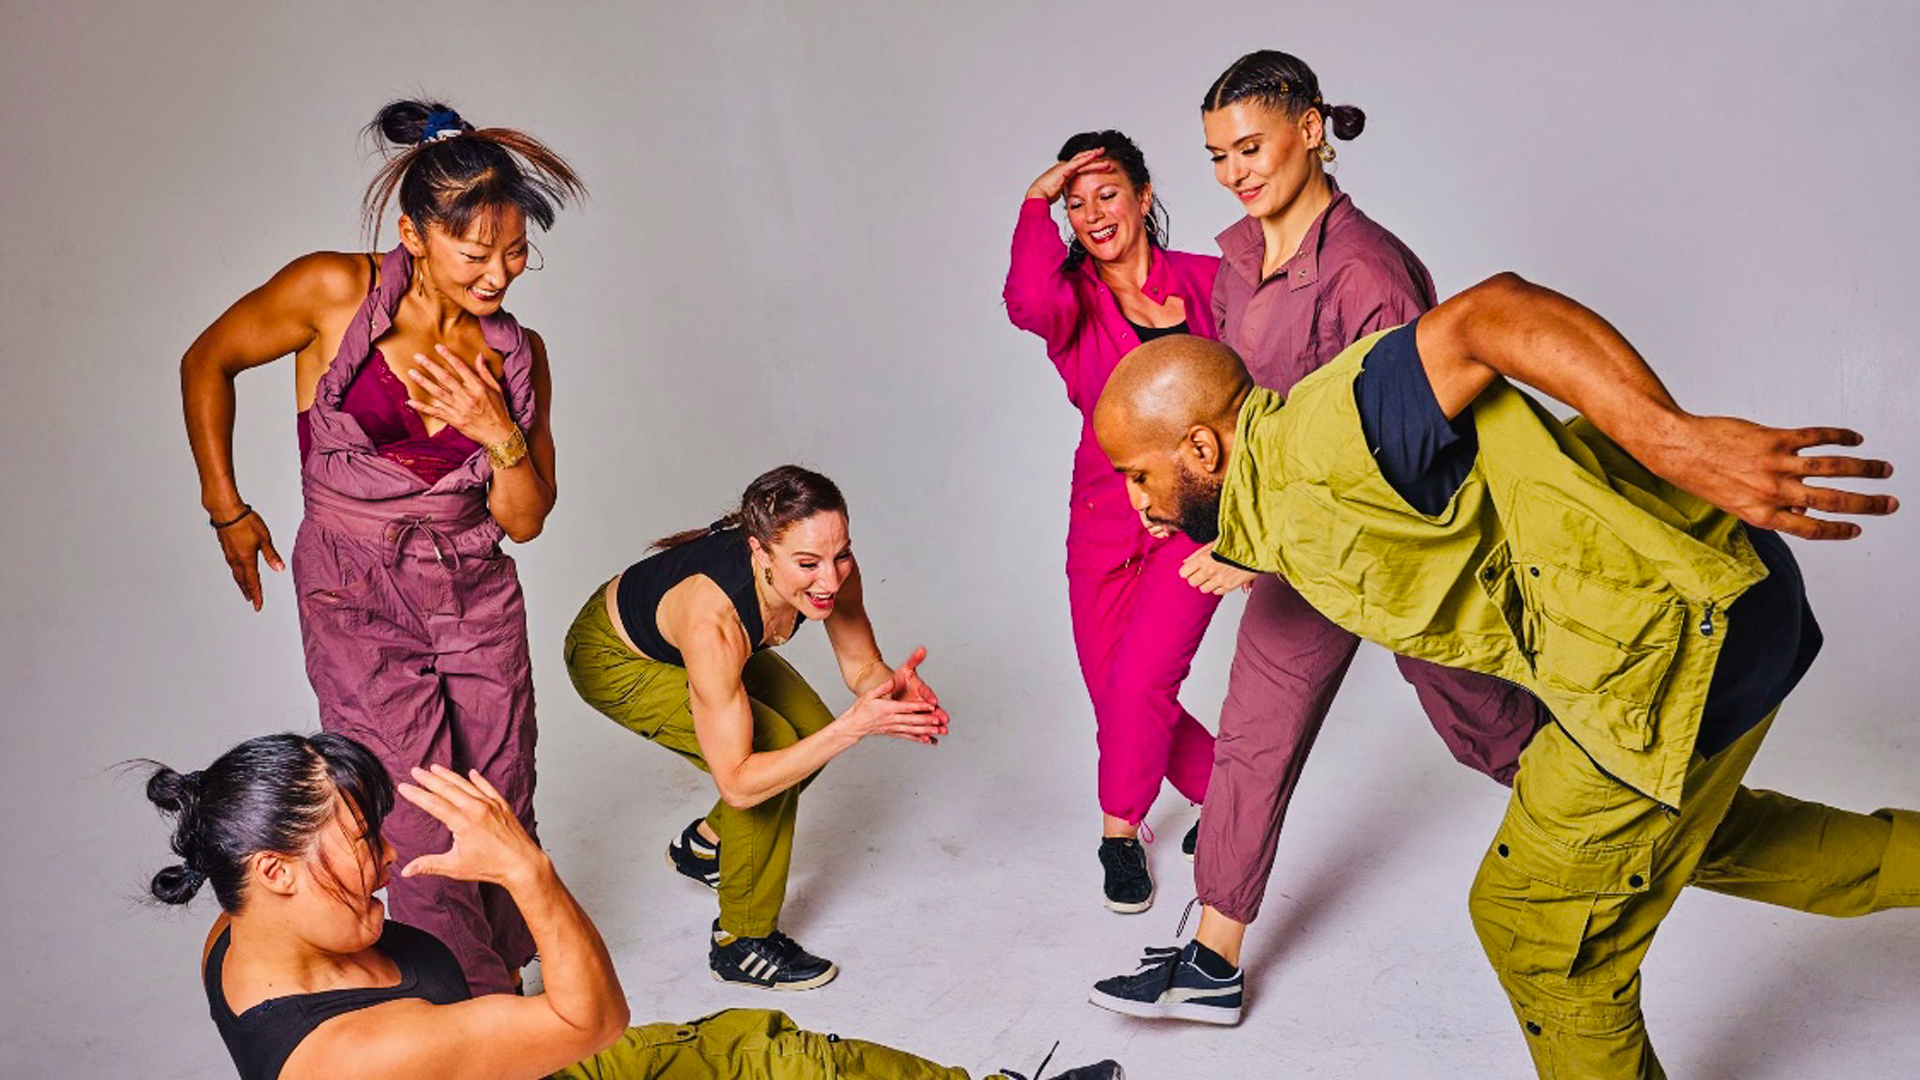 Six dancers in purple, pink and green jumpsuits circle around each other against a gray background